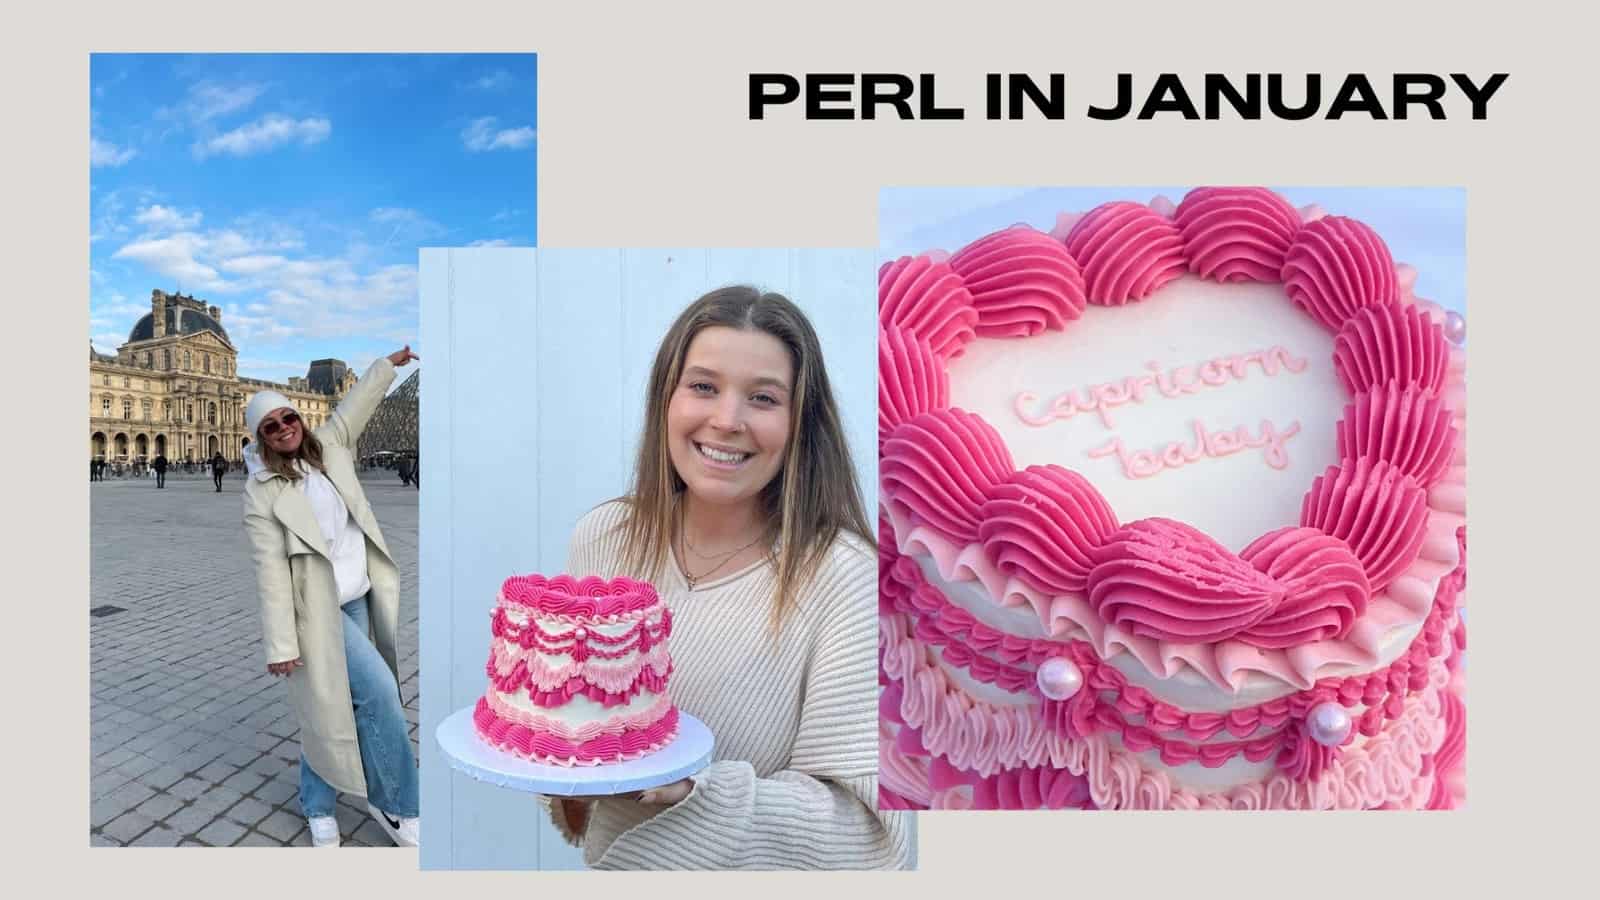 What happened at PERL in January? - PERL Cosmetics